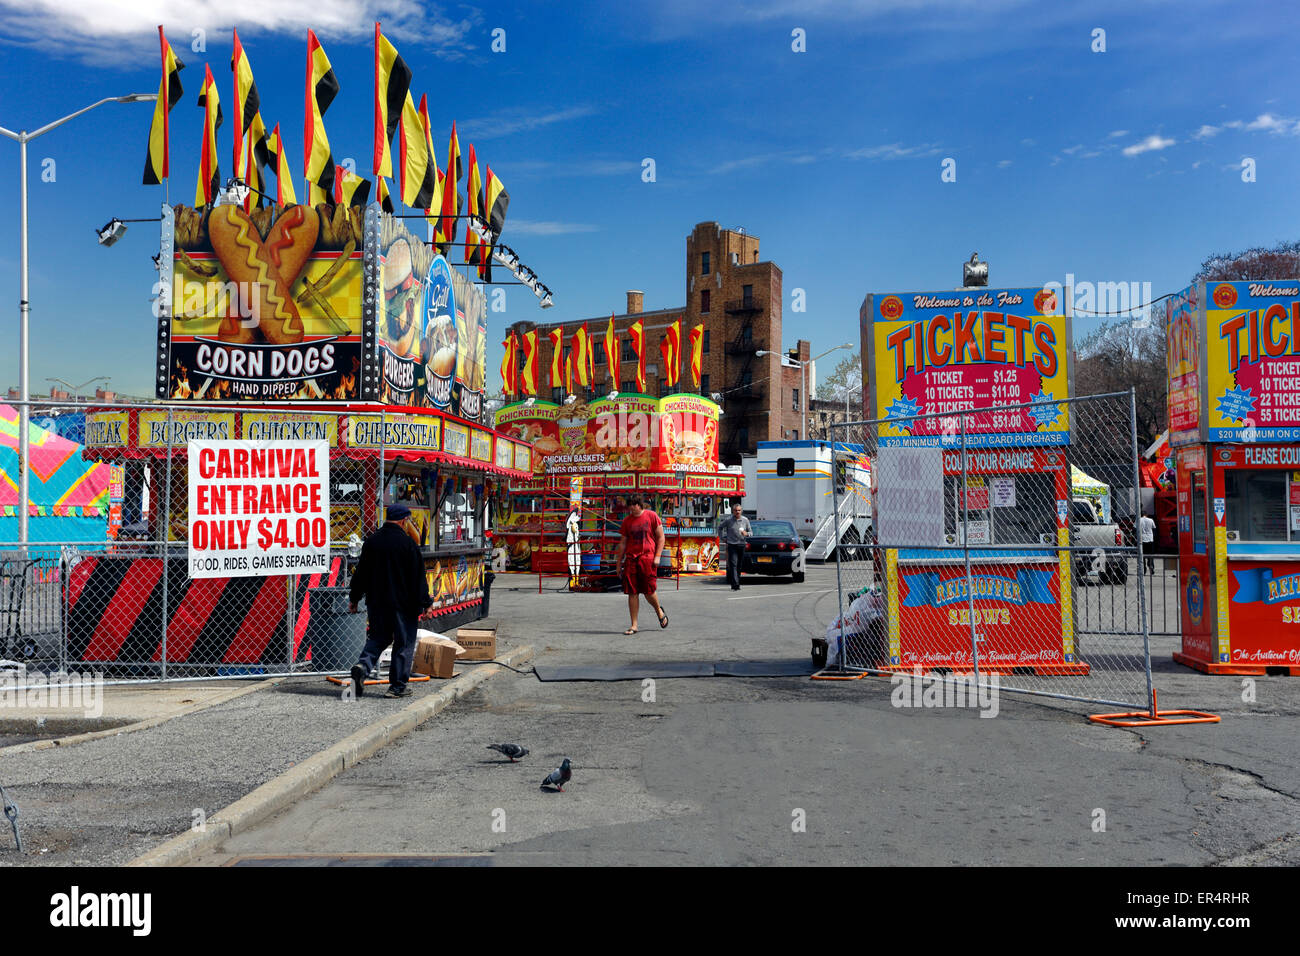 Carnival Yonkers New York Stock Photo, Royalty Free Image 83084899 Alamy